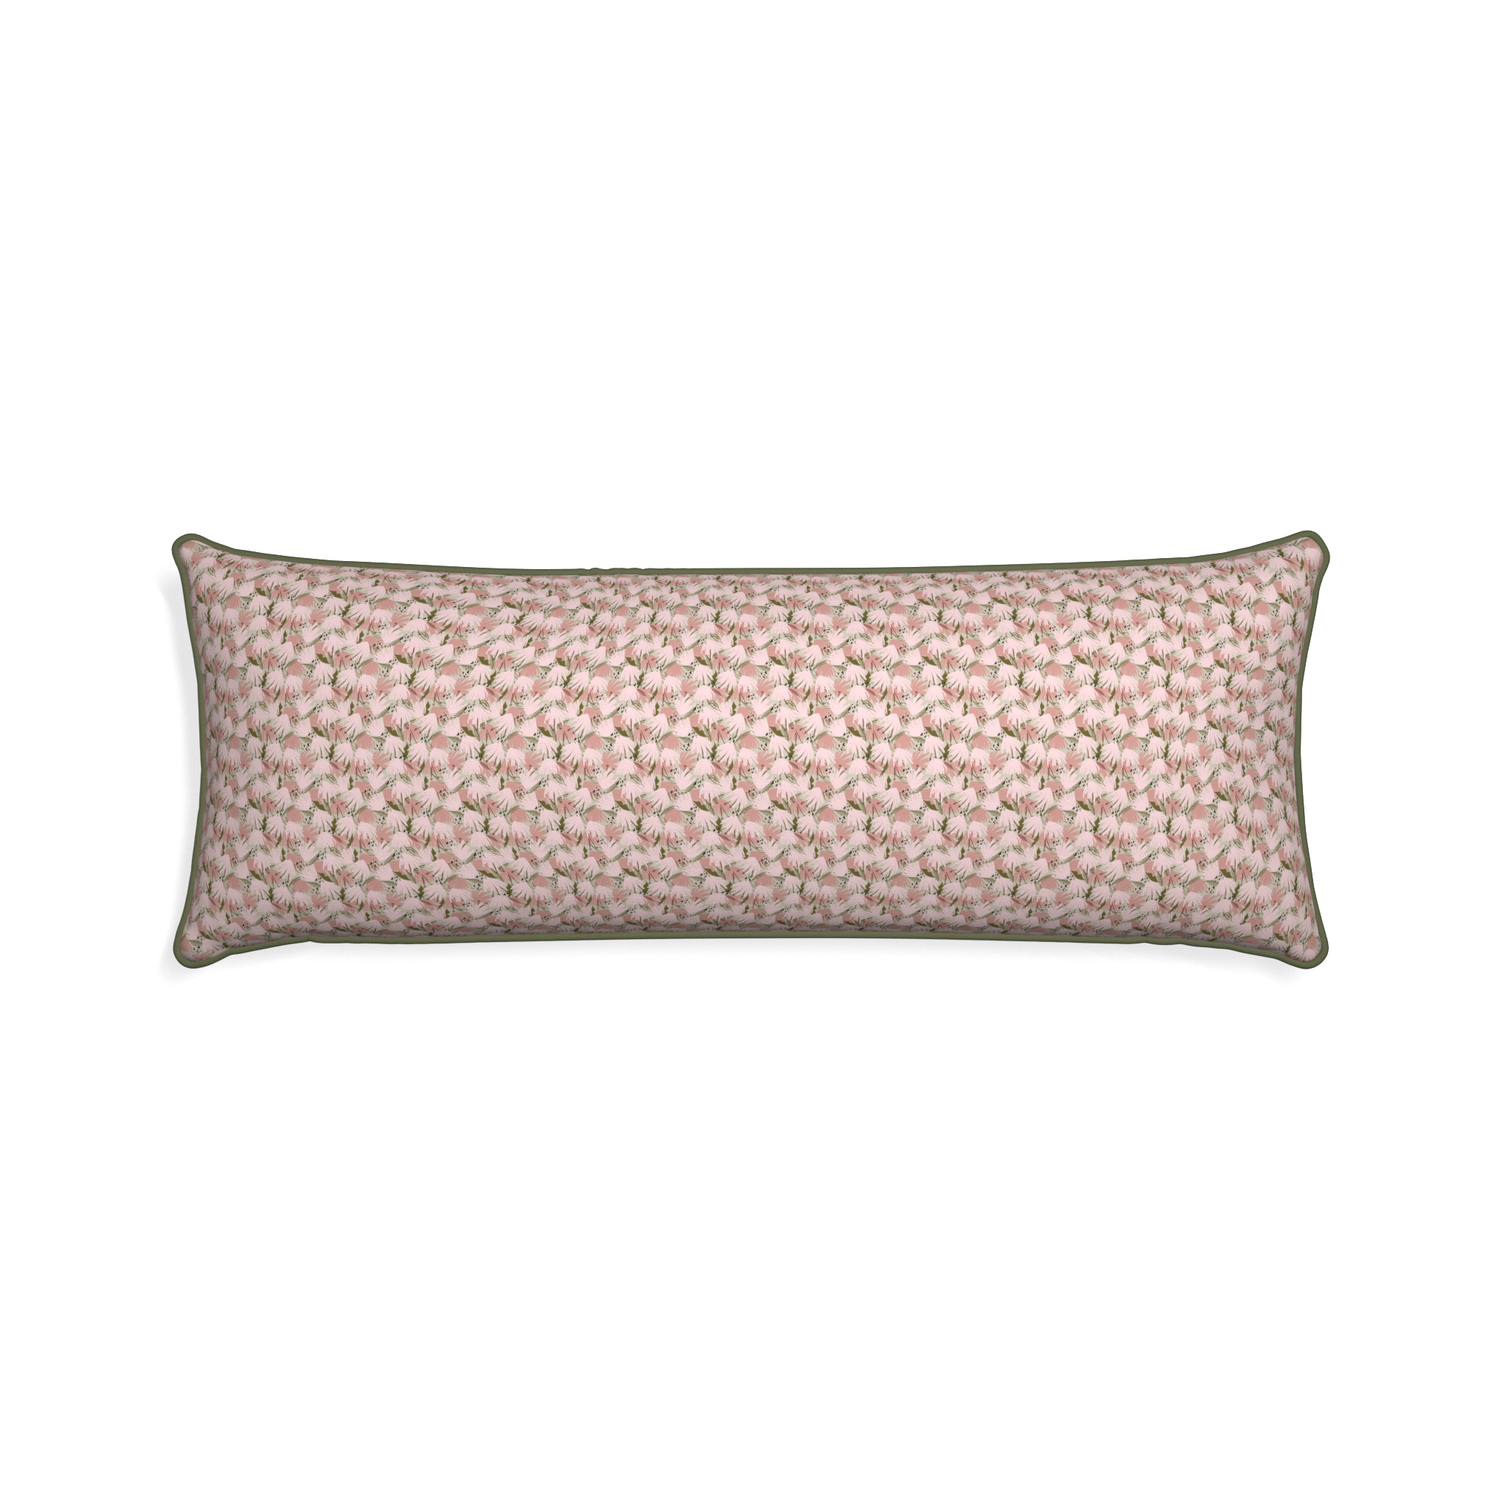 Xl-lumbar eden pink custom pillow with f piping on white background